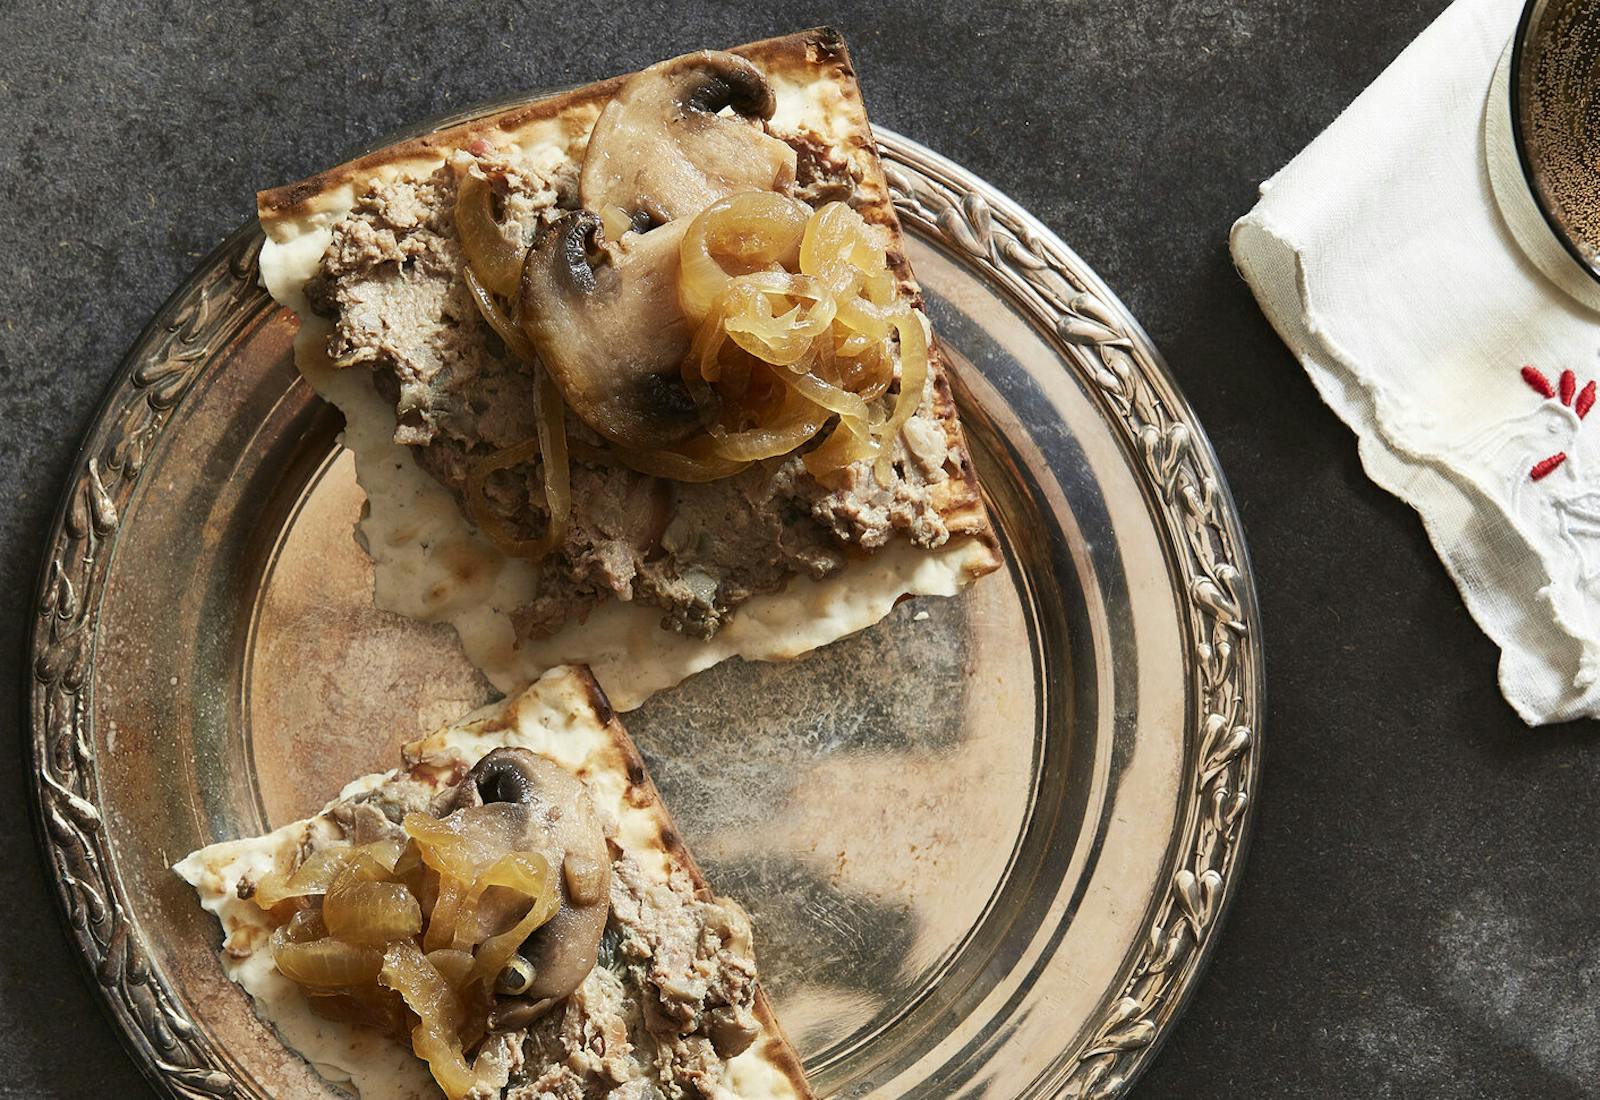 Chopped liver with mushrooms and onions on matzo bread, atop grey surface.